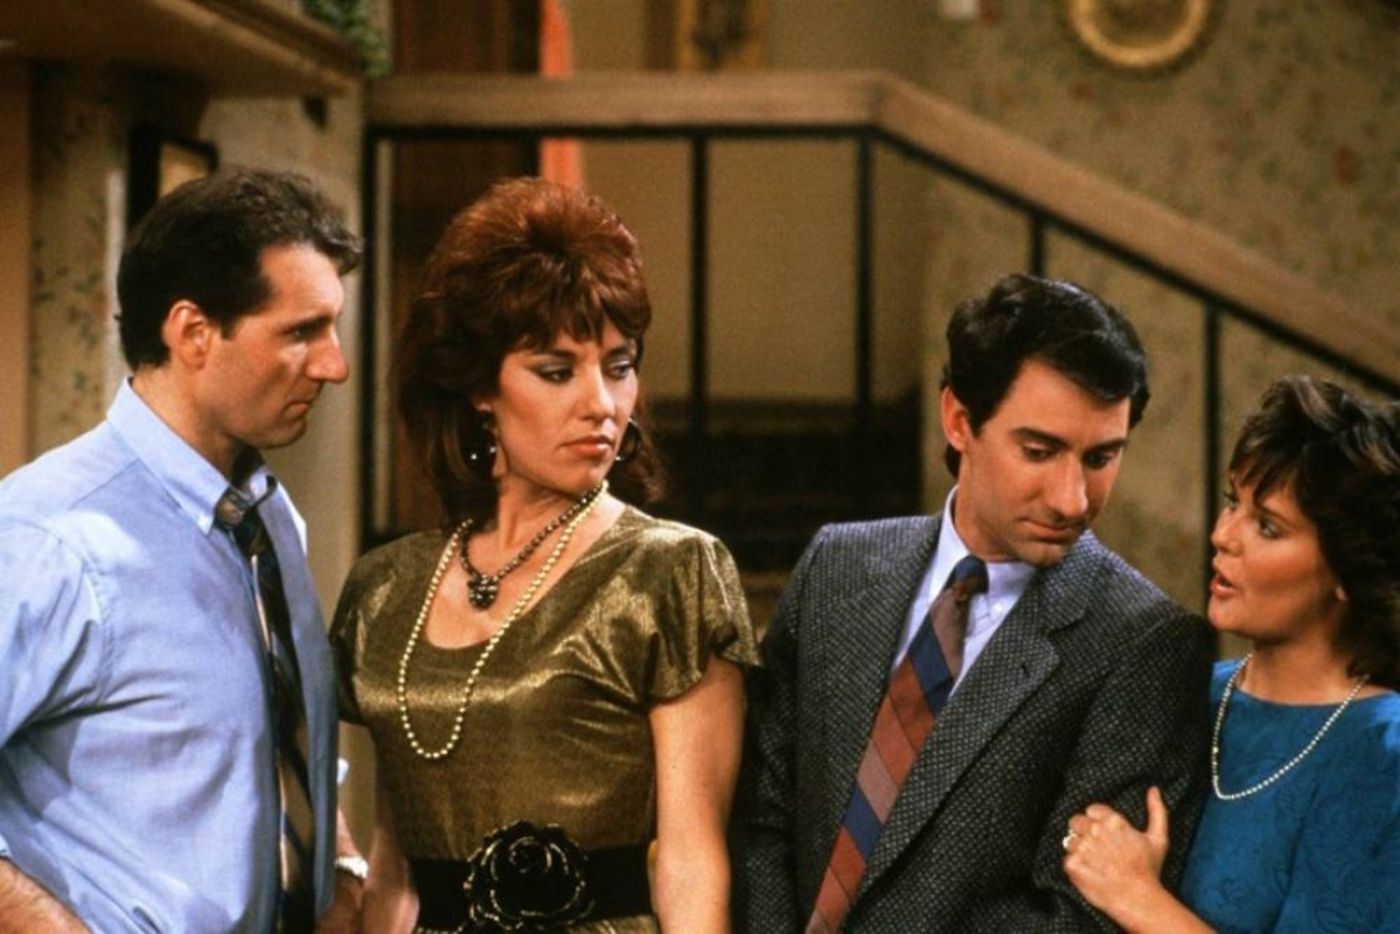 Ed ONeill as Al Bundy, Katey Sagal as Peggy Bundy, David Garrison as Steve Rhoades and Amanda Bearse as Marcy D'Arcy/Rhoades standing alongside each other in the Bundys' house in Married...With Children